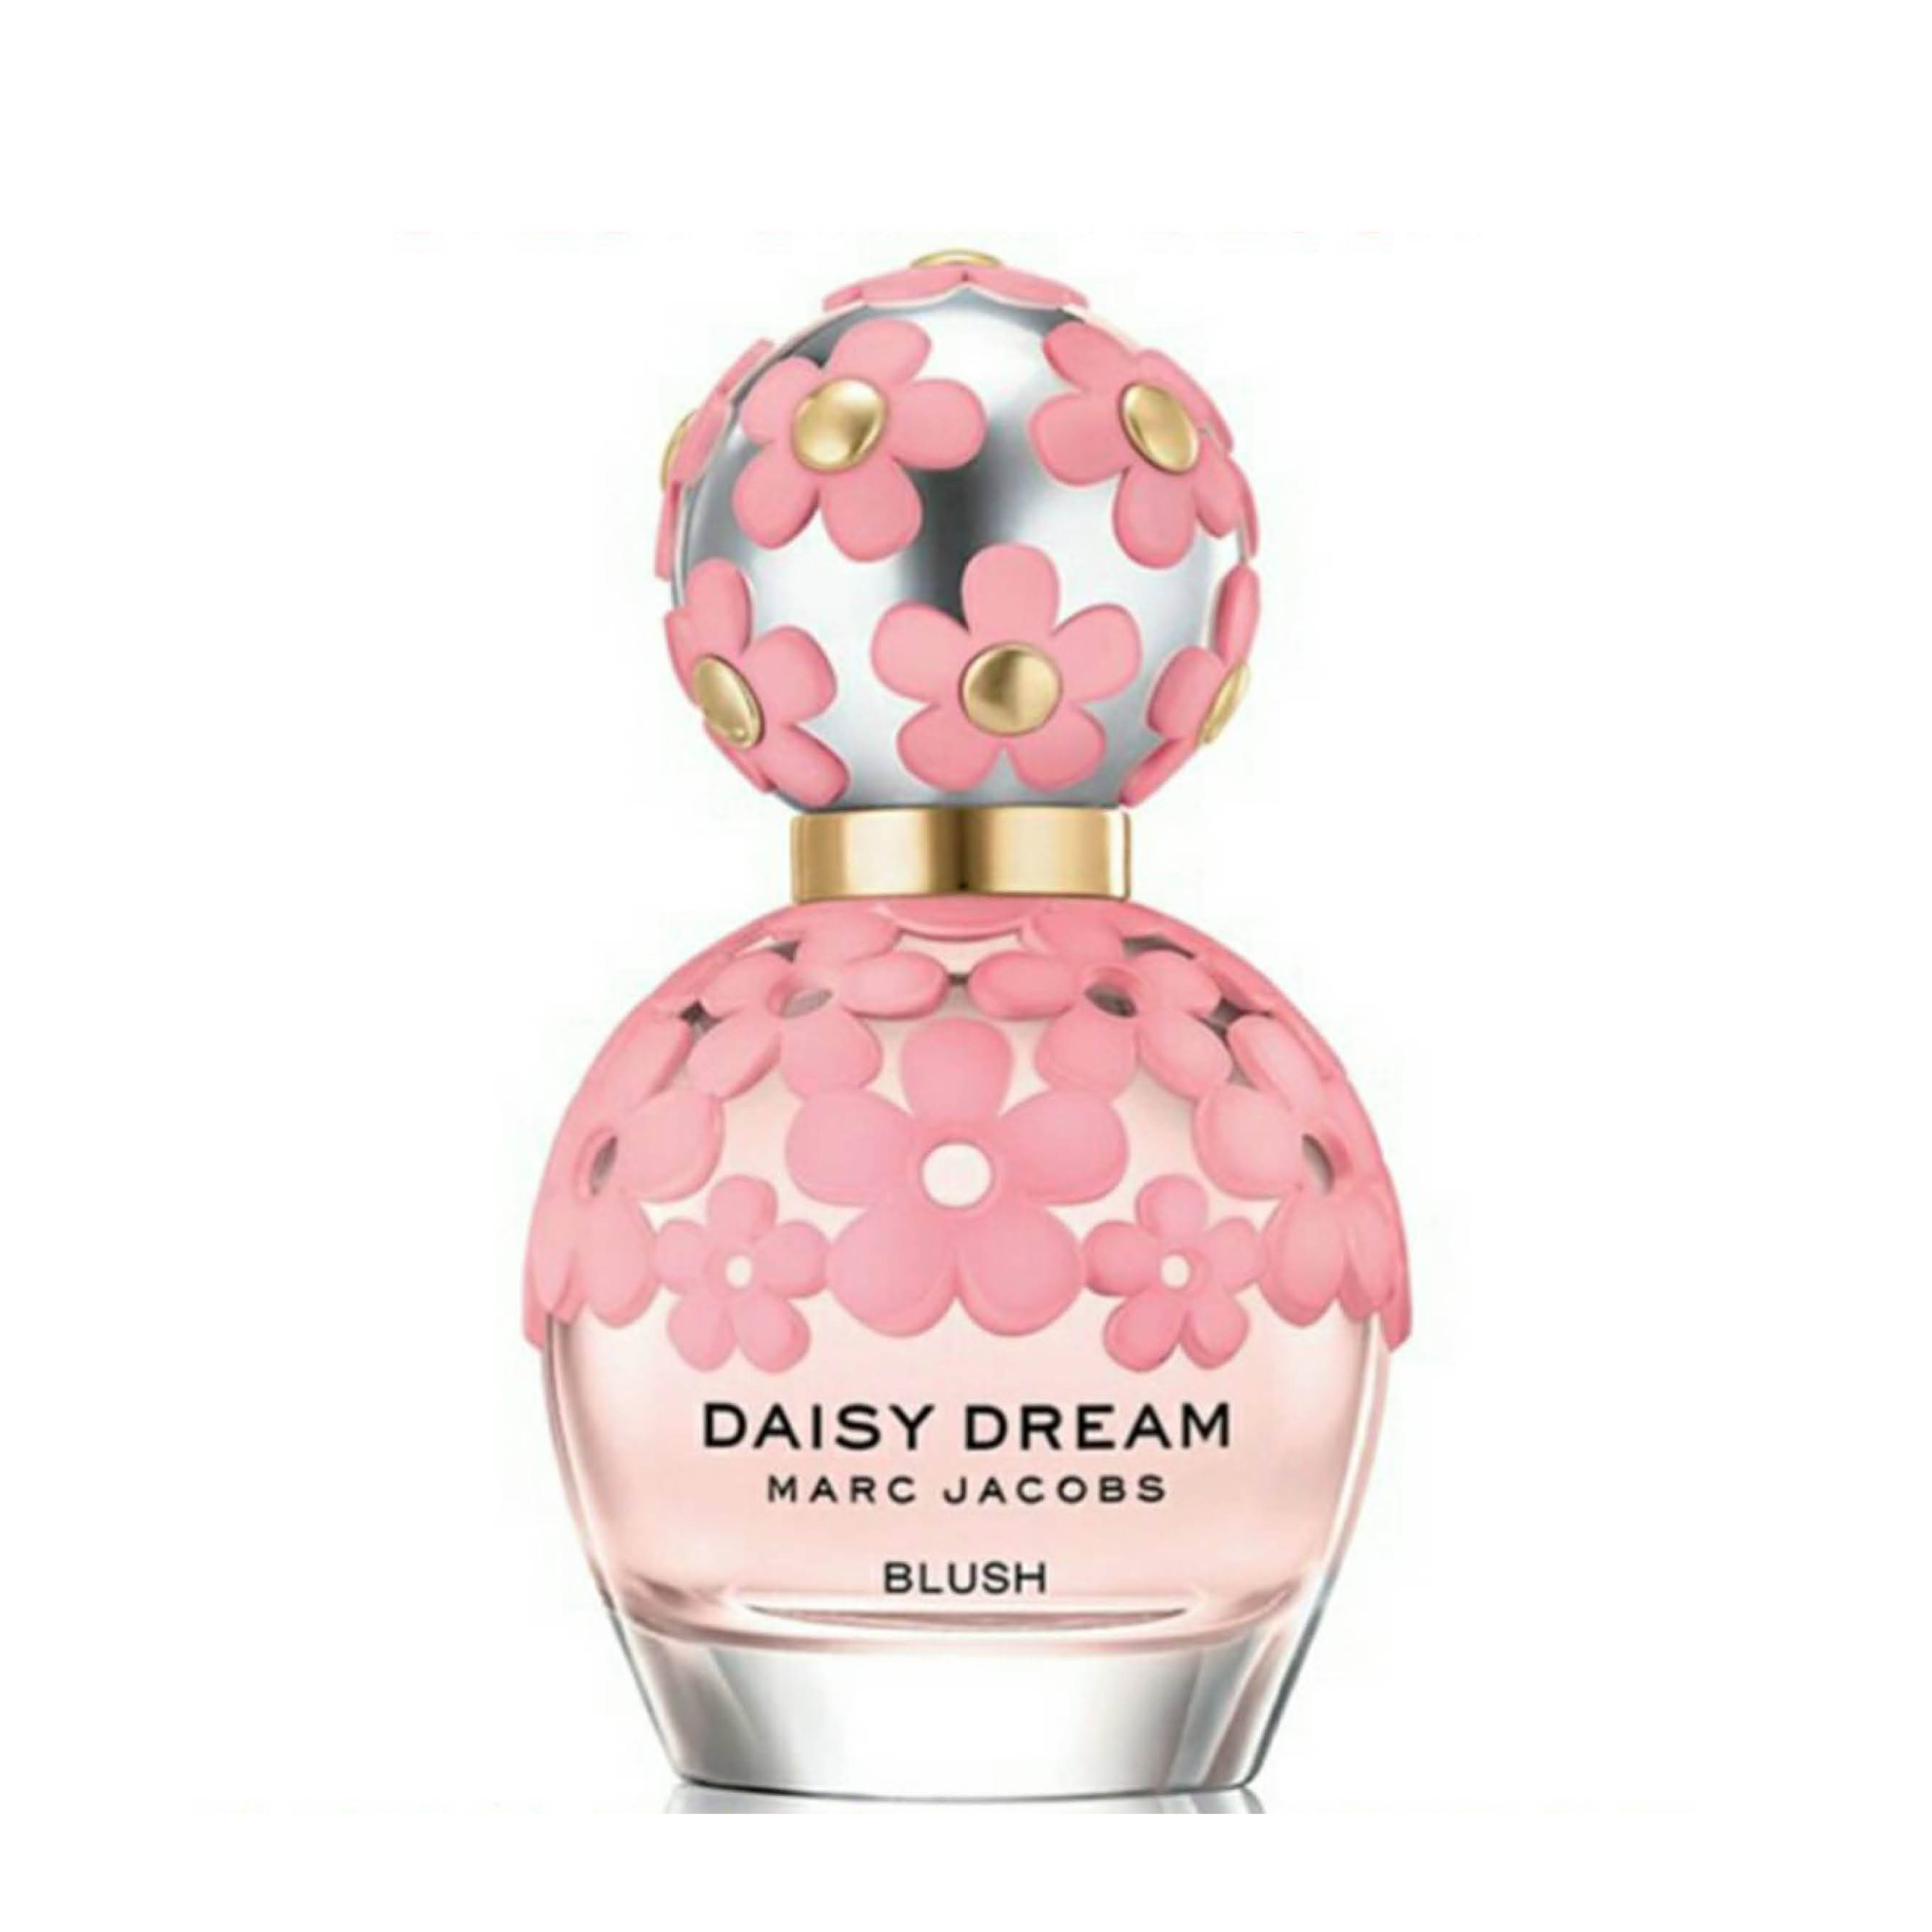 Perfumes To Match Your Fave Emojis The Perfume Shop Blog